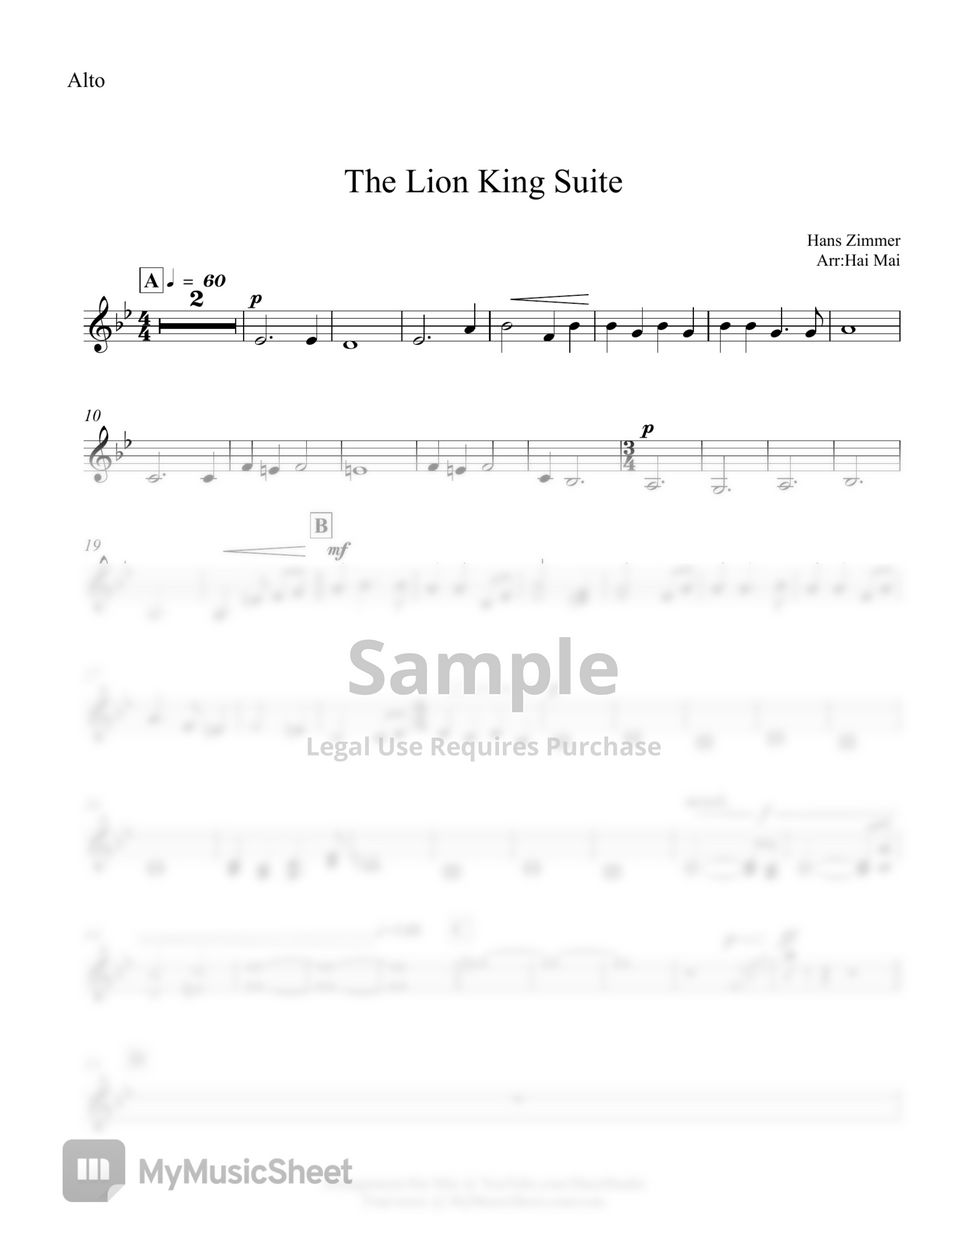 Hans Zimmer - The Lion King Suite for Orchestra - Set of Part by Hai Mai